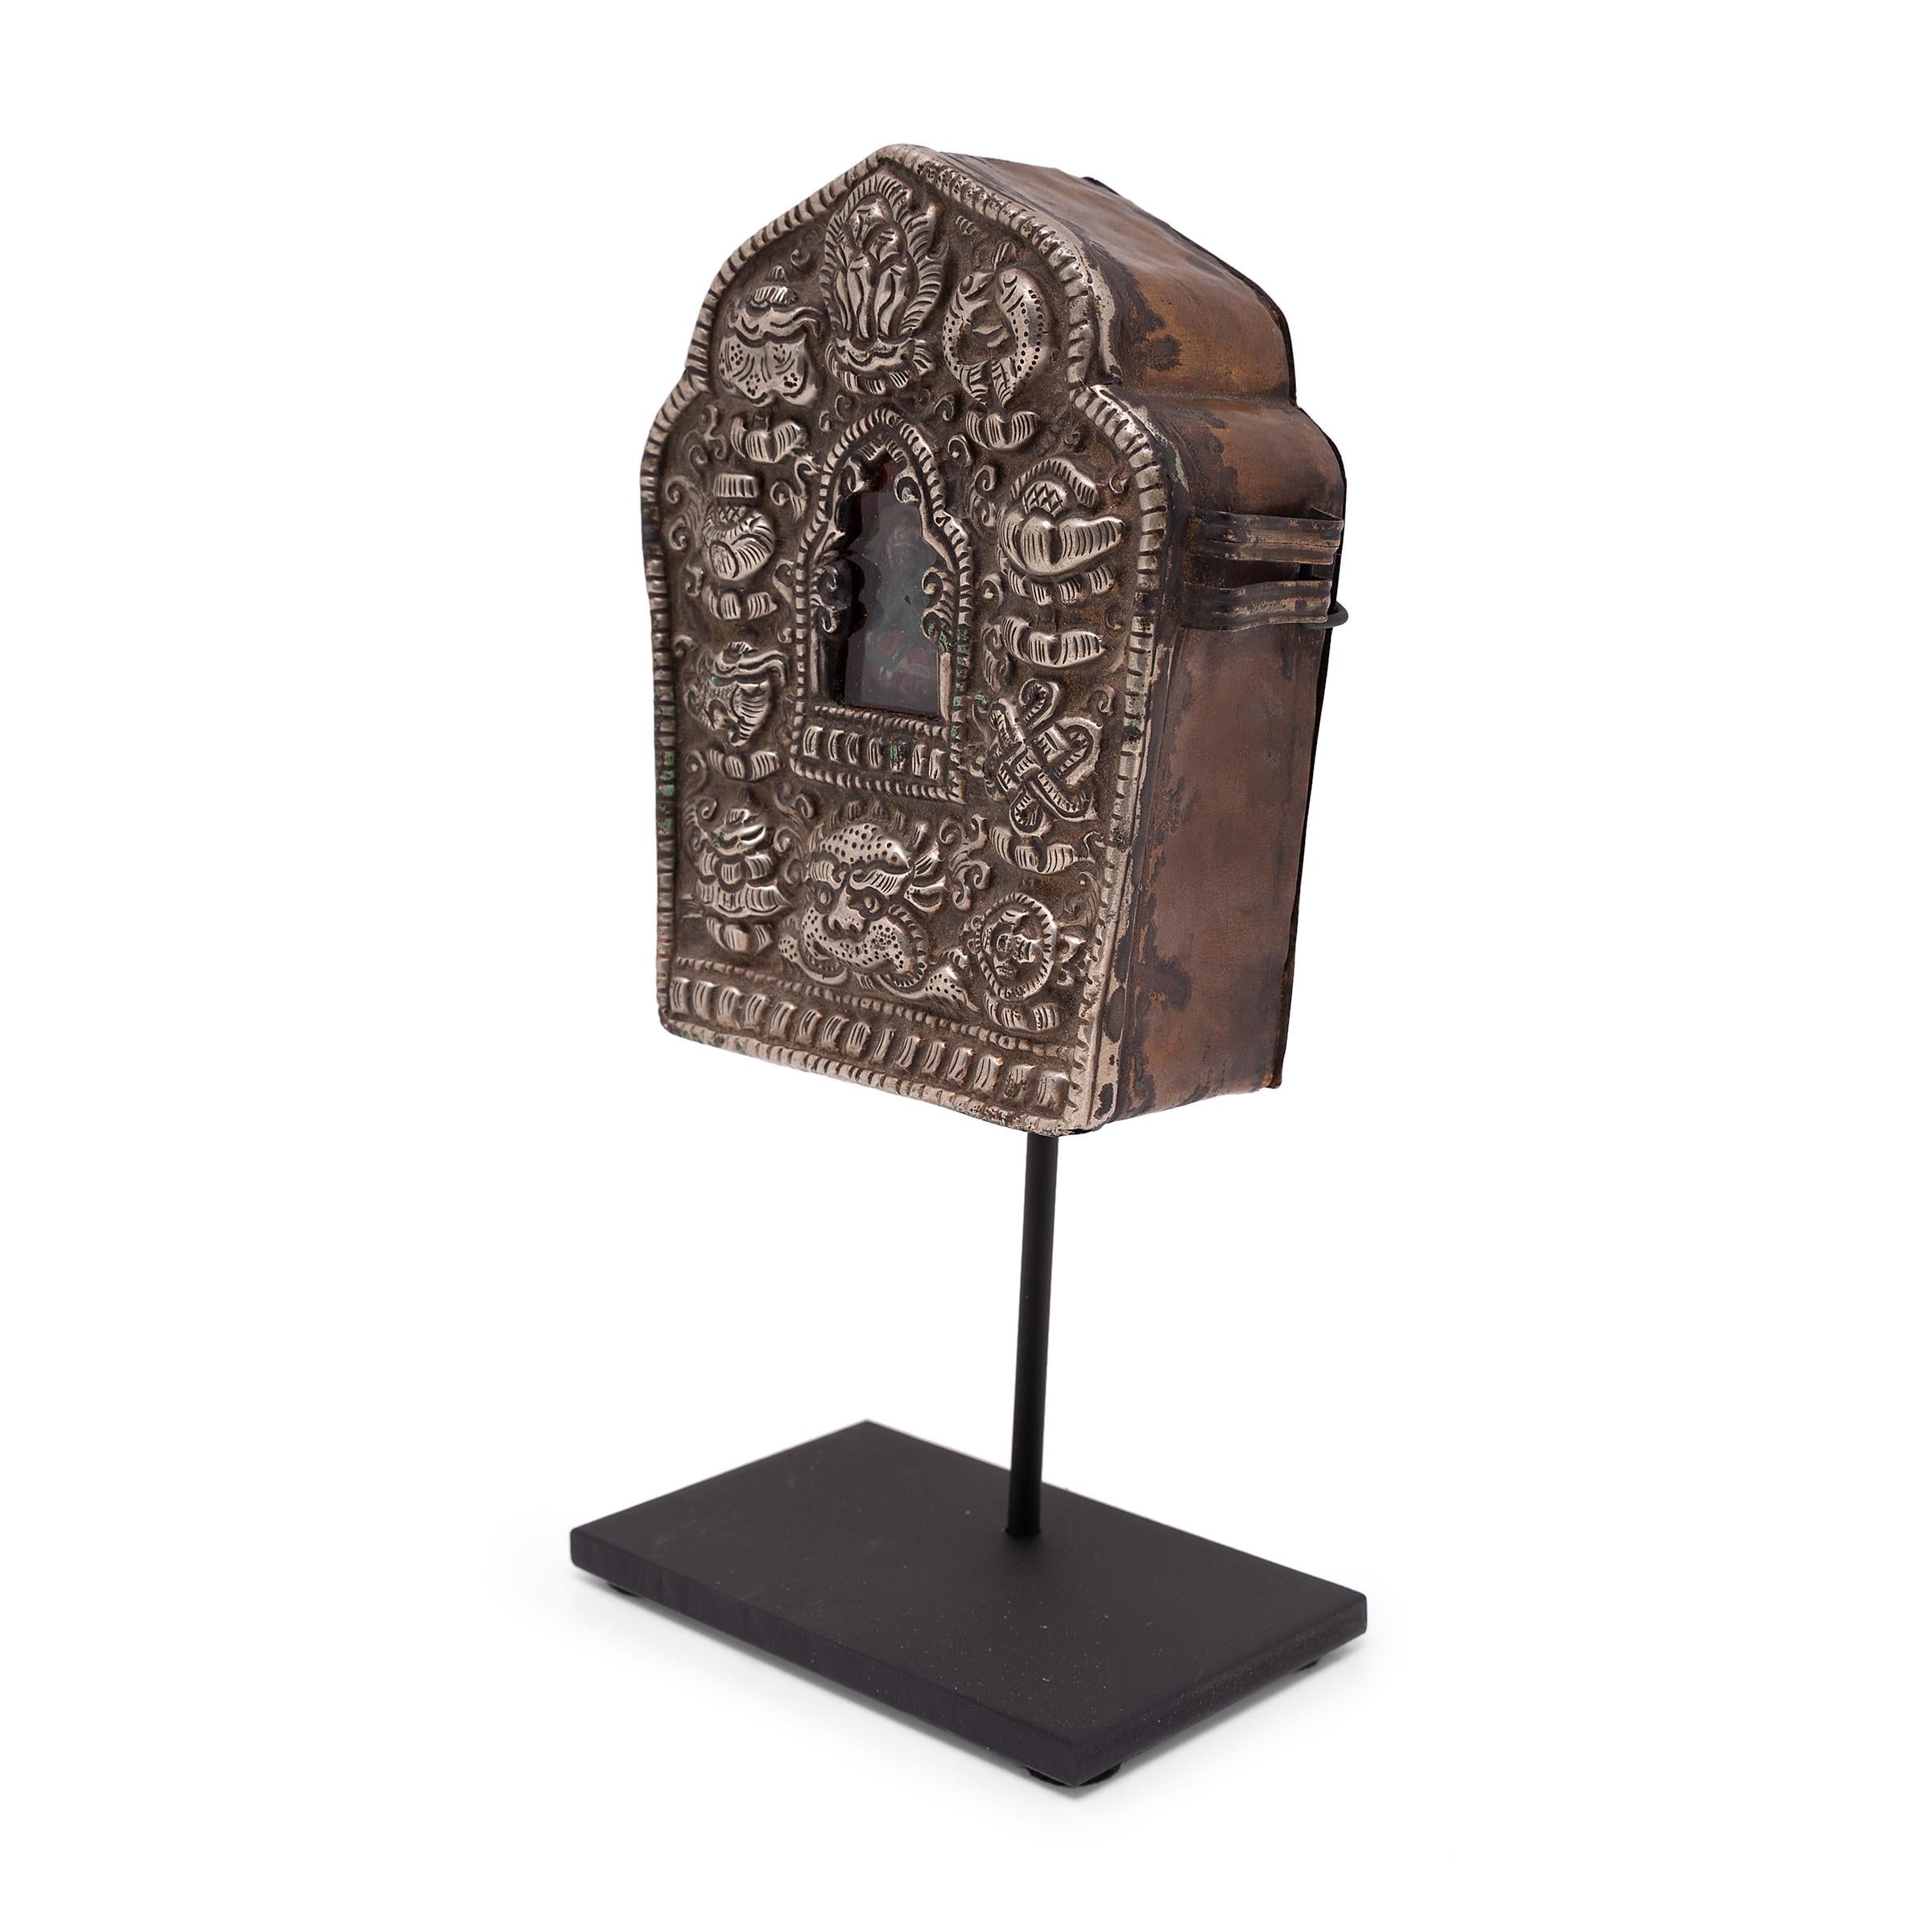 Tibetan traveling shrines, known as Gau, were believed to offer protective powers and were used to hold and carry sacred objects during long journeys. Crafted over a century ago, Buddhist followers may have purchased this intricate gau while on